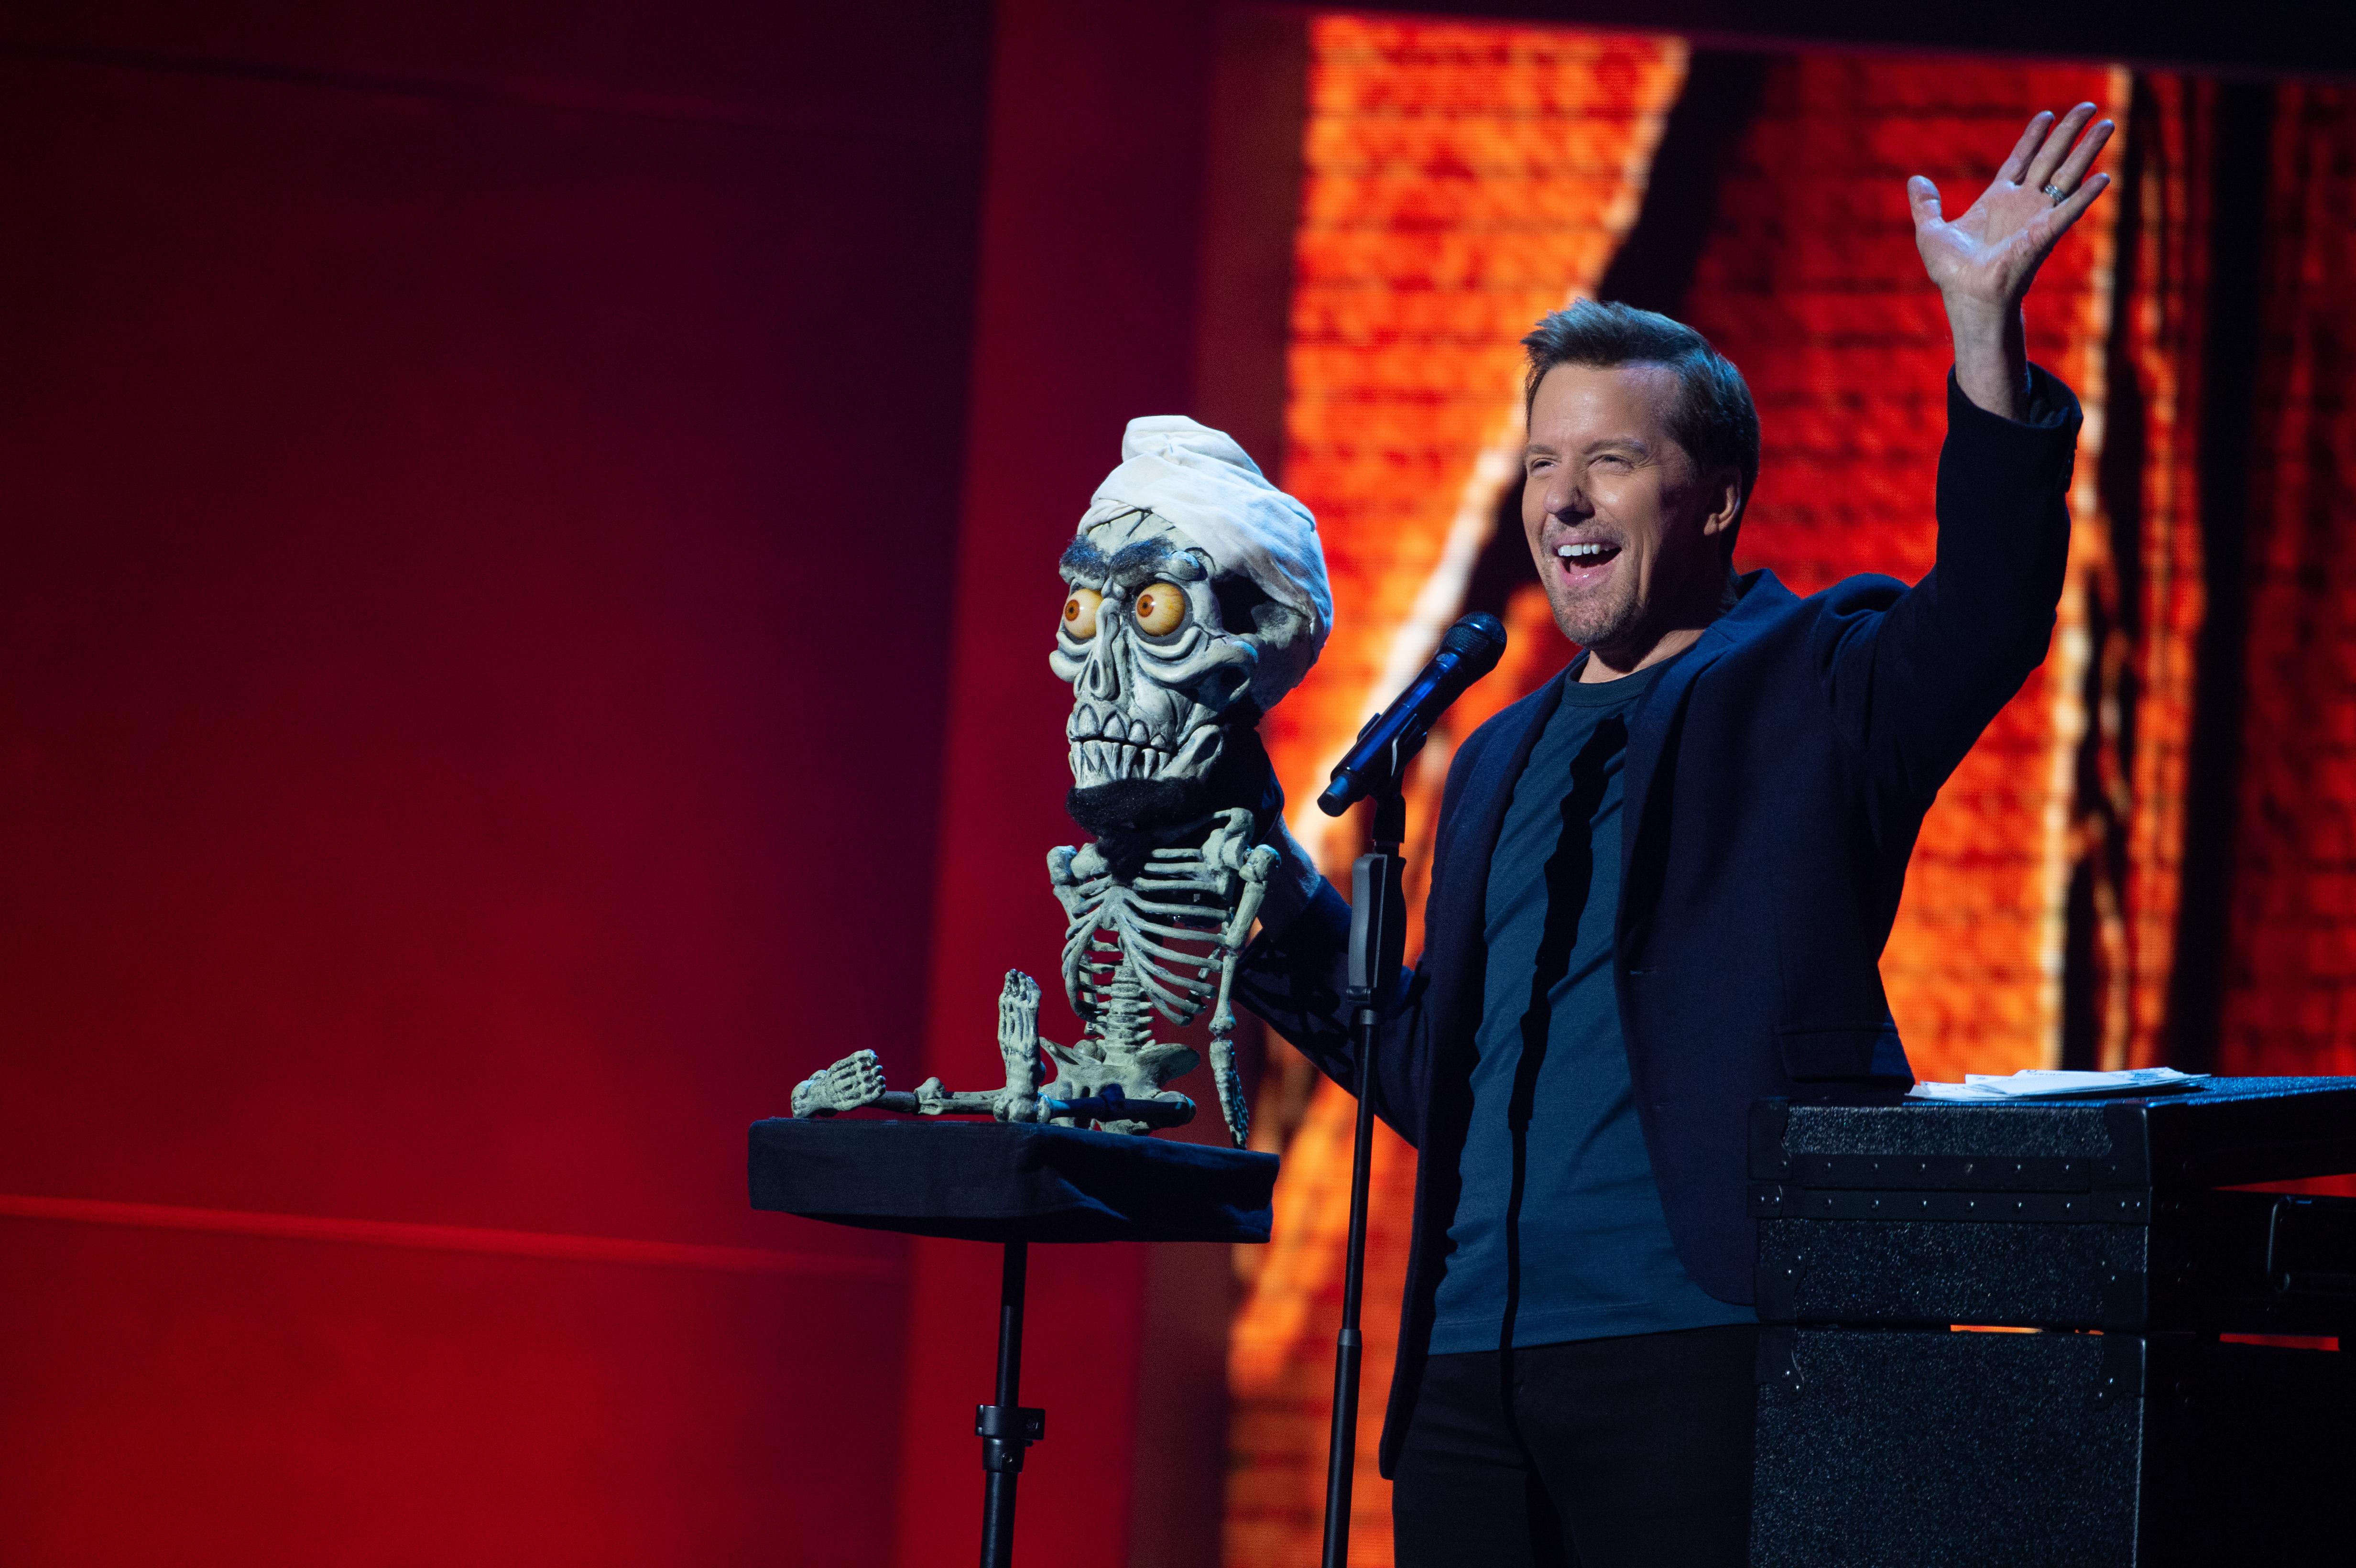 Jeff Dunham and Achmed the Dead Terrorist